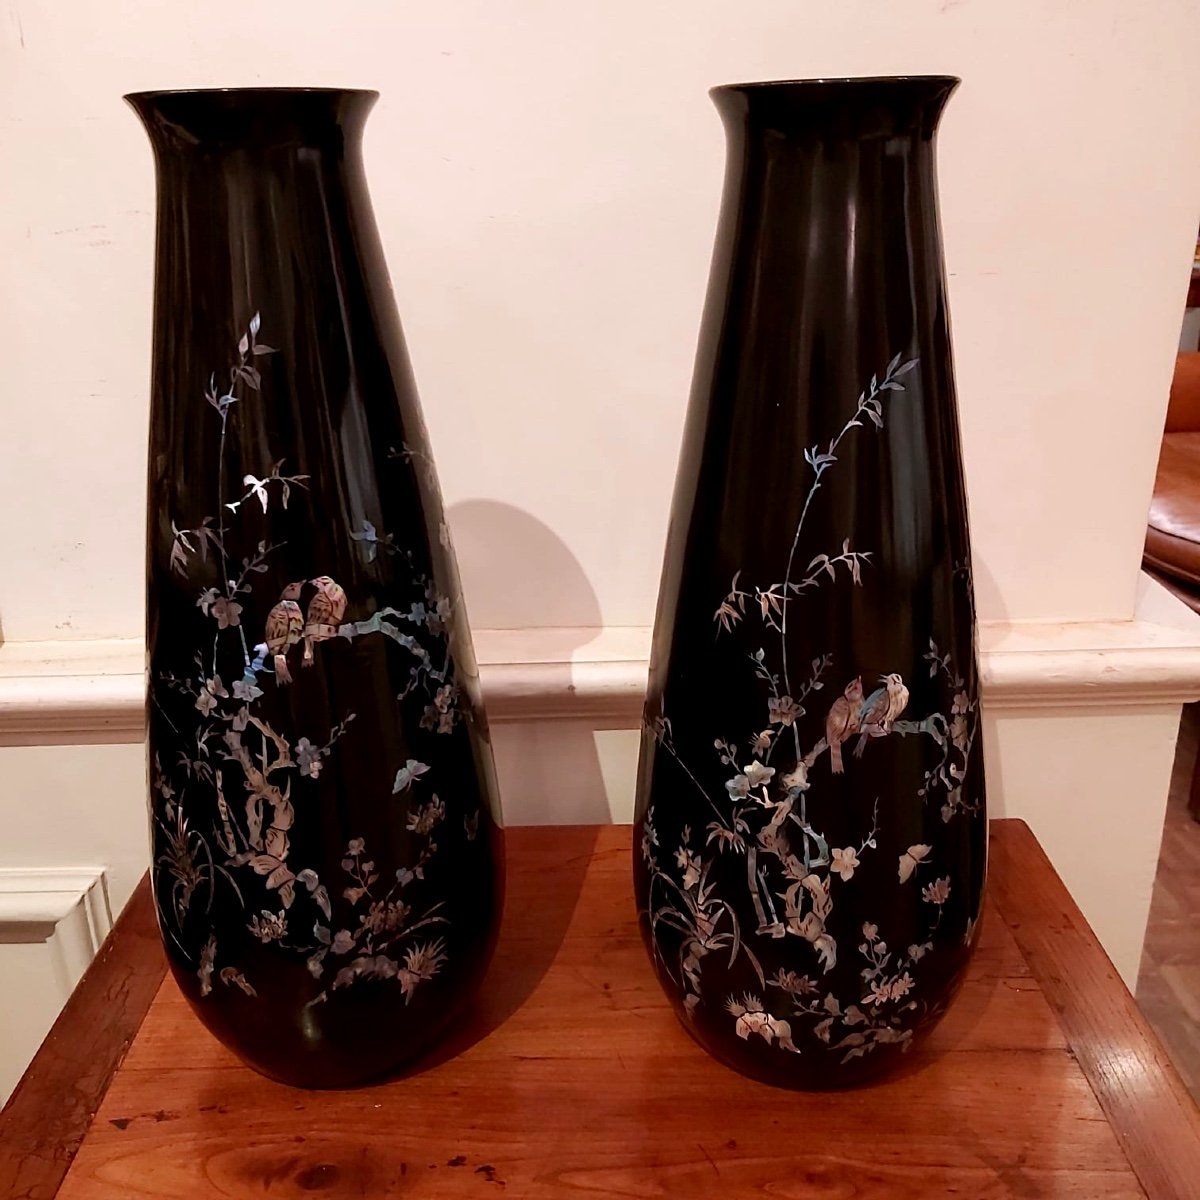 Pair Of Japanese Vases In Black Lacquer. Period 20th Century